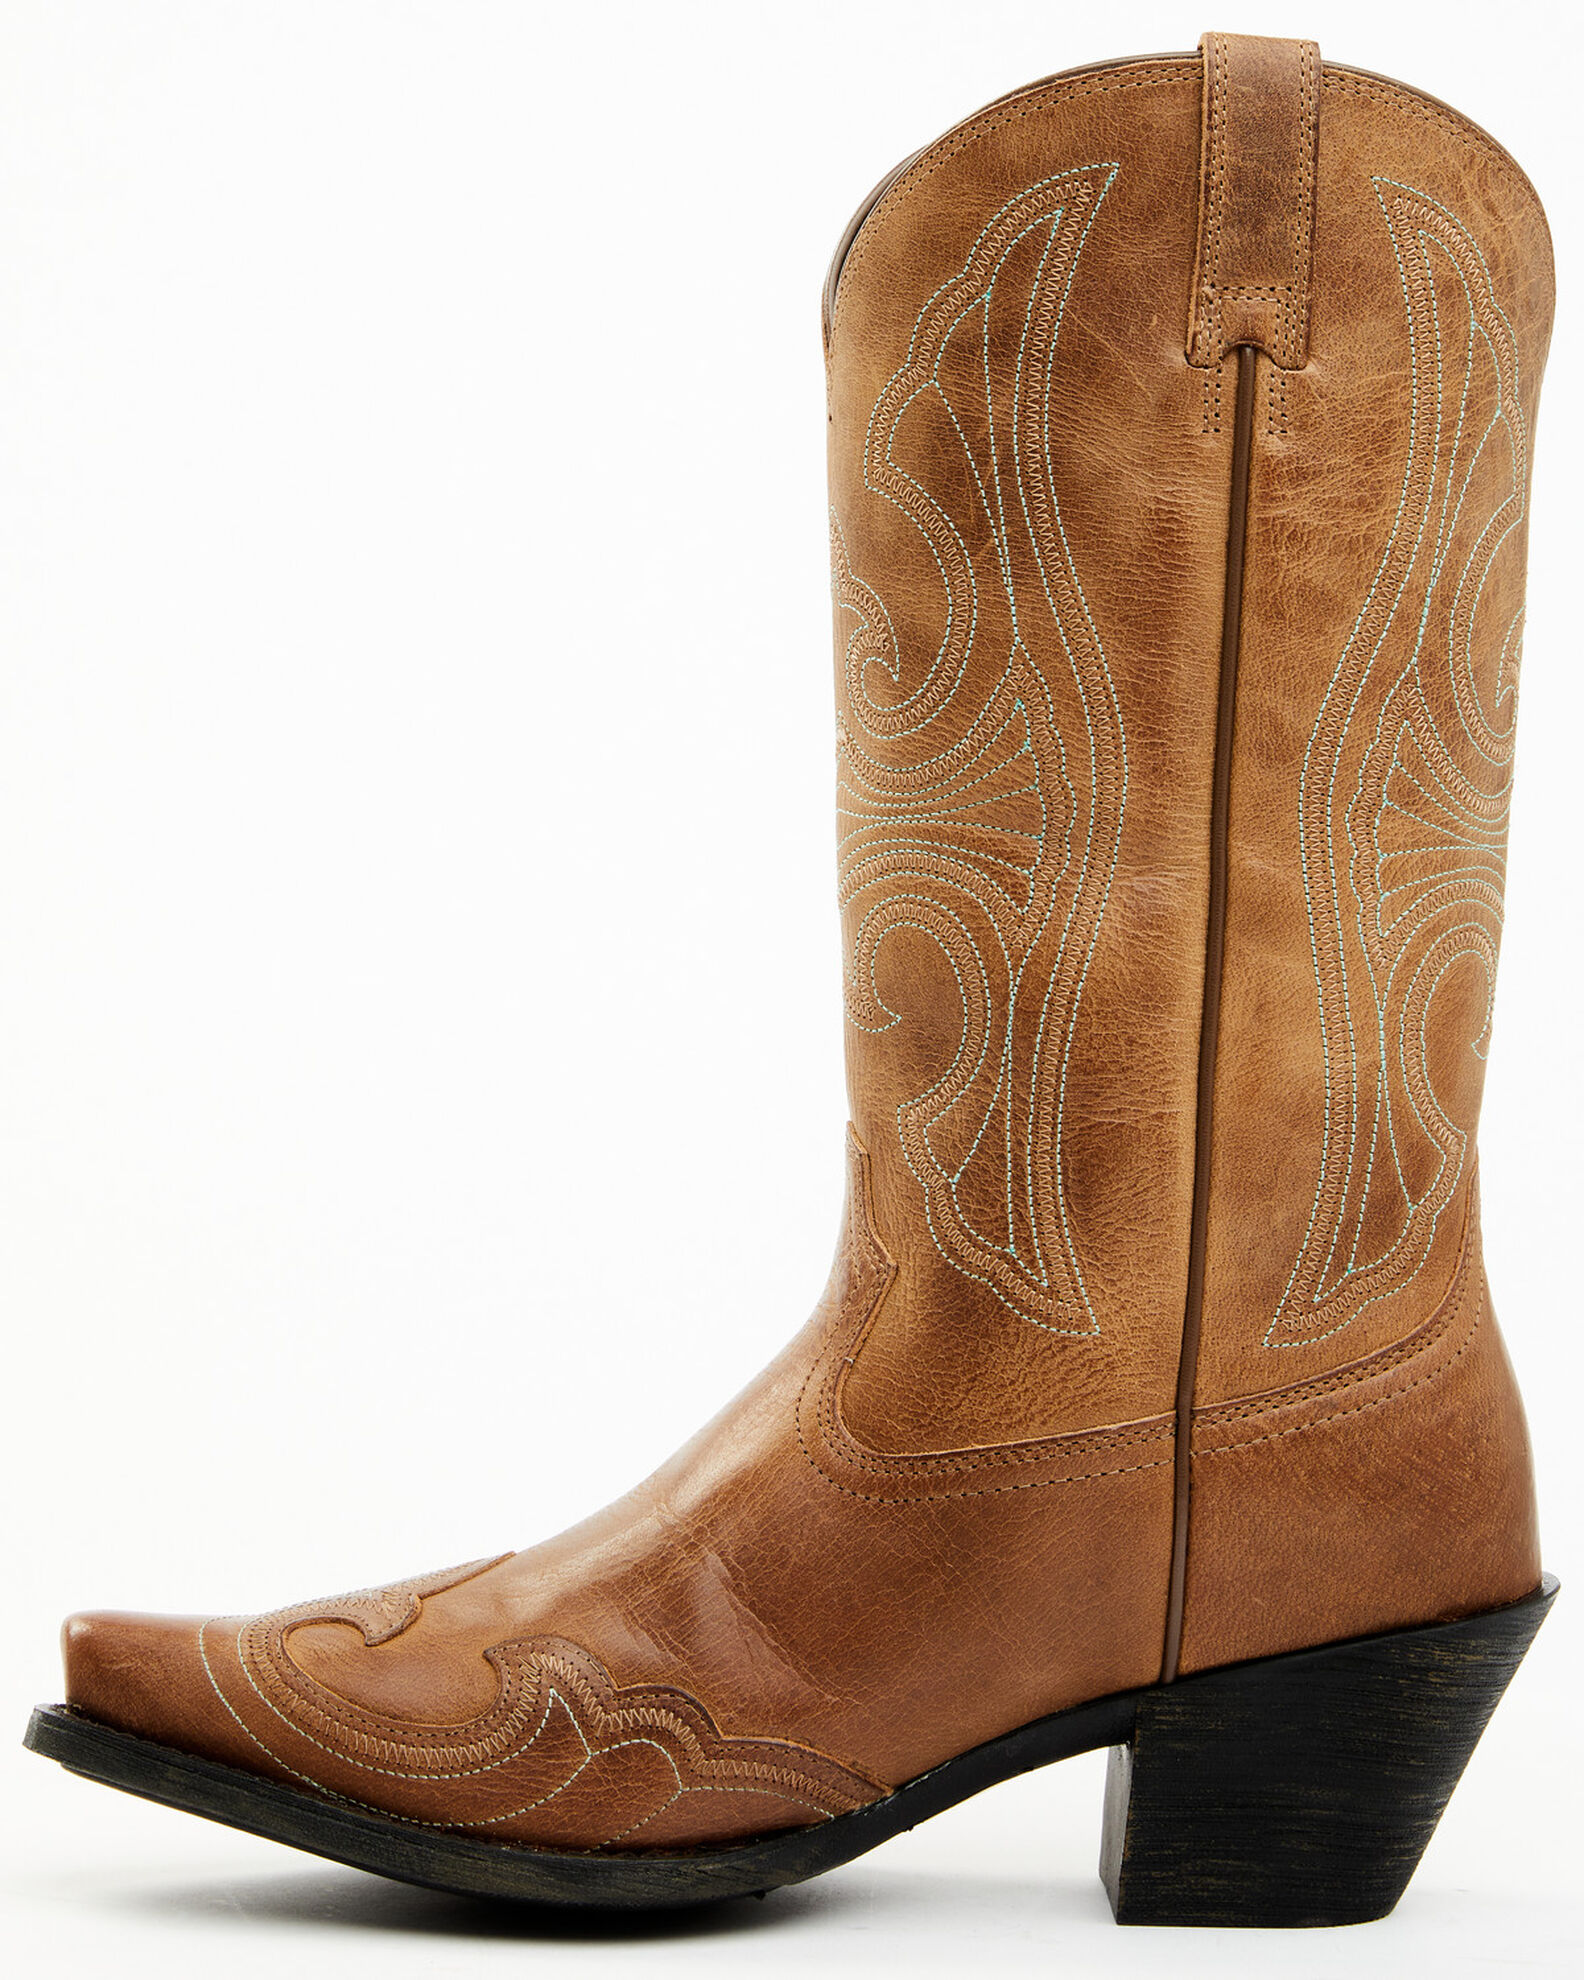 Product Name: Ariat Women's Round Up Sandstorm Western Boots - Snip Toe